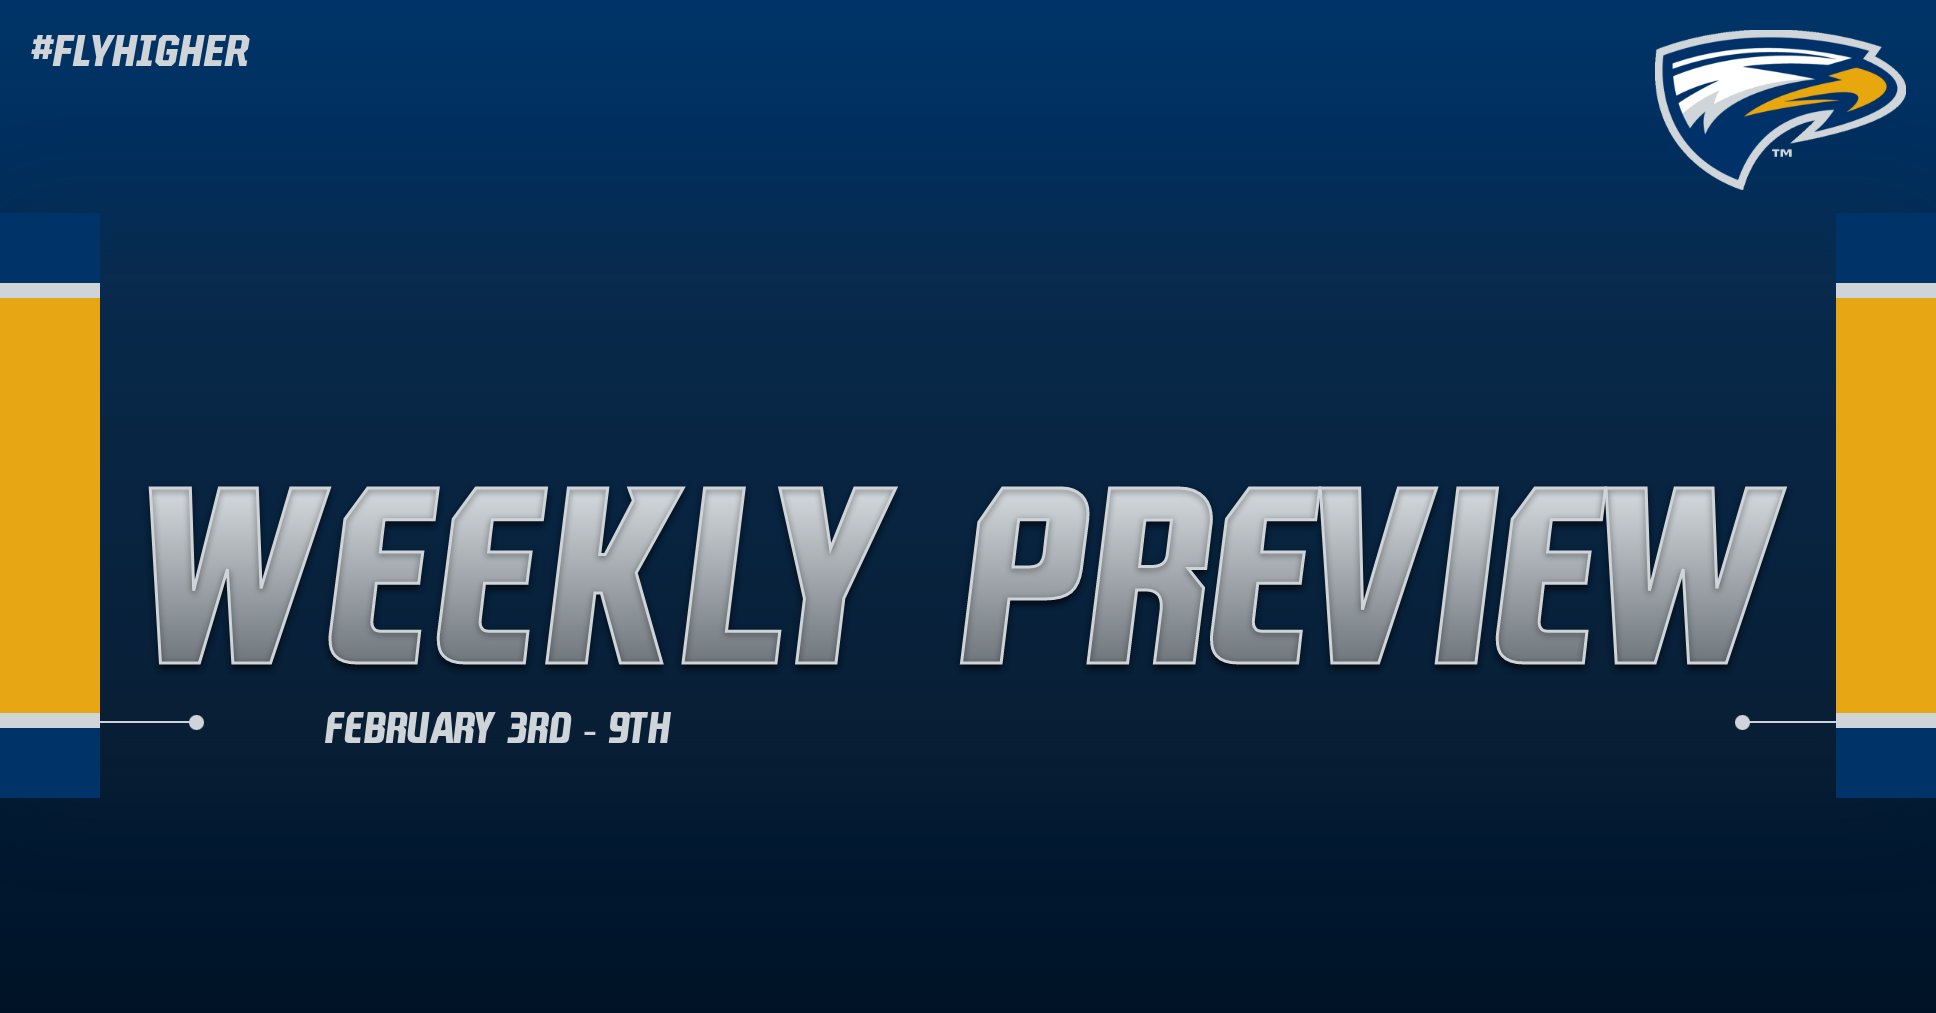 Emory Athletics Weekly Preview - February 3rd - 9th